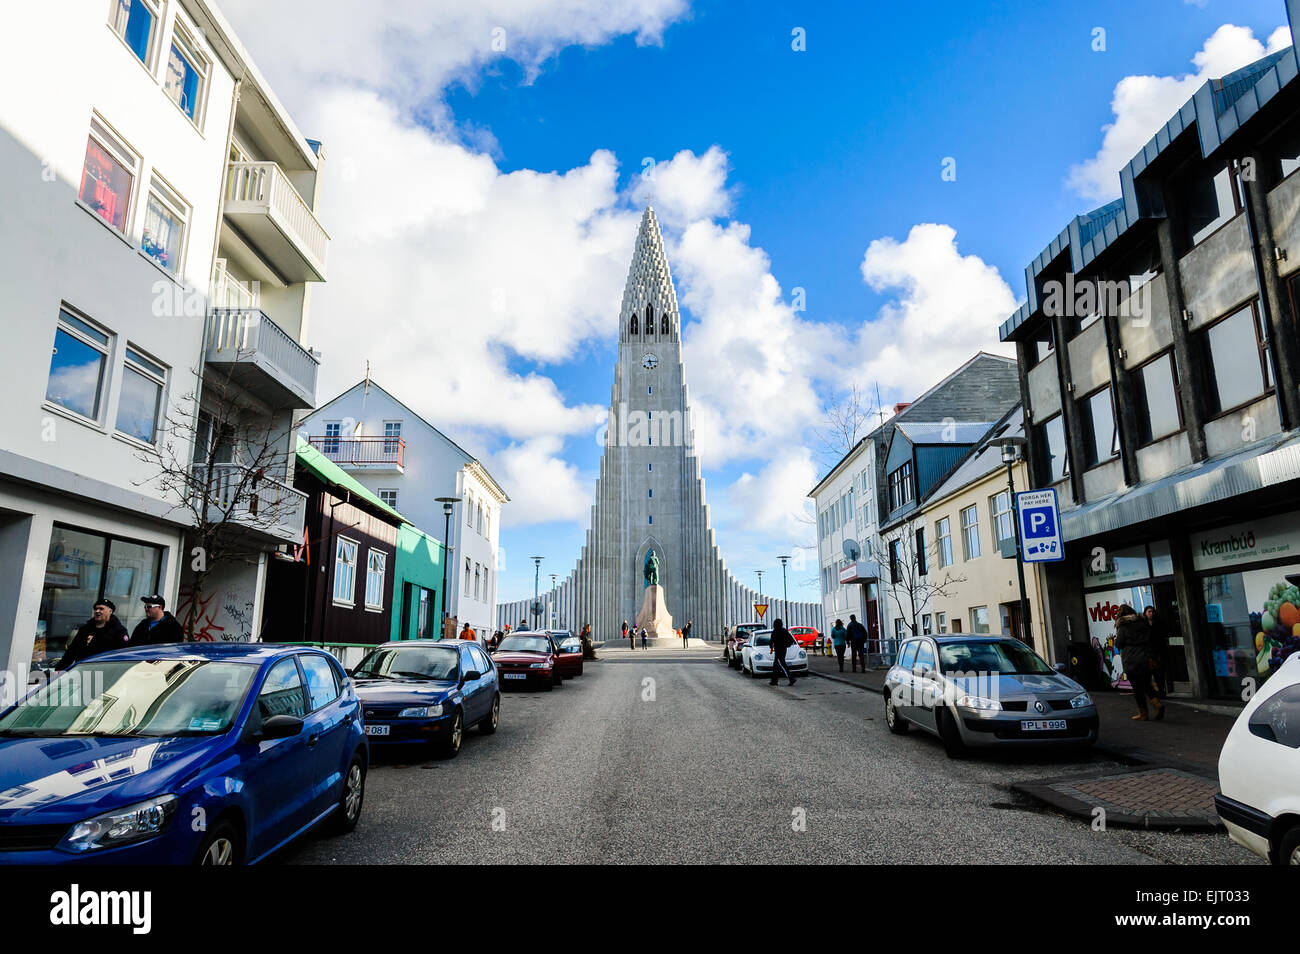 Hallgrímskirkja is seen at the end of a narrow street in Reykjavik, Iceland Stock Photo